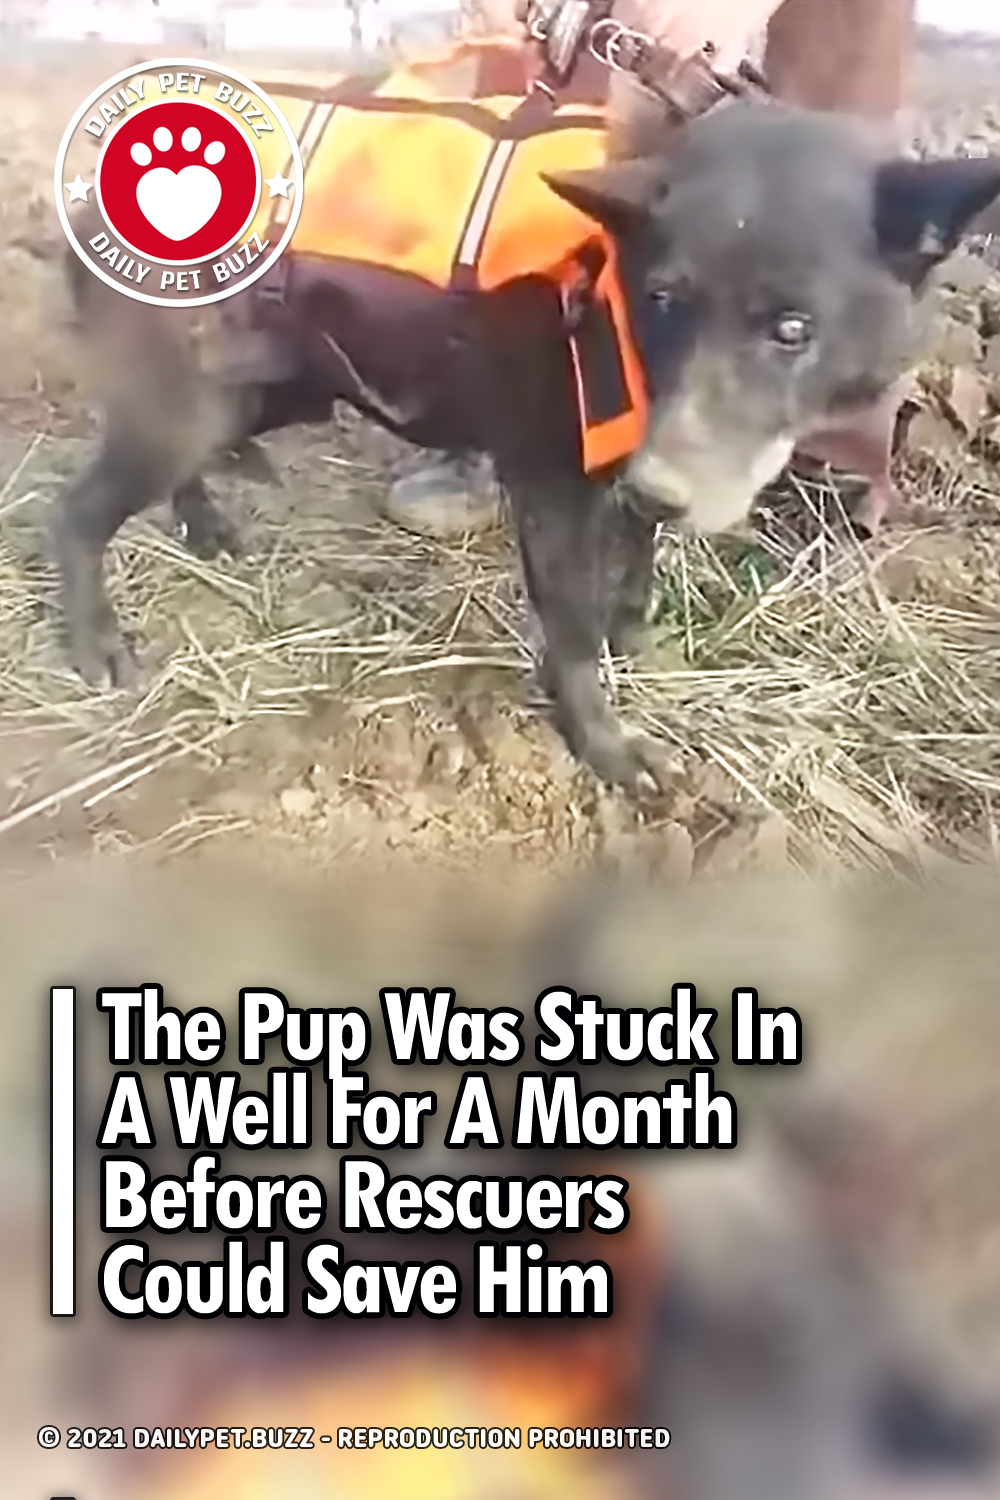 The Pup Was Stuck In A Well For A Month Before Rescuers Could Save Him